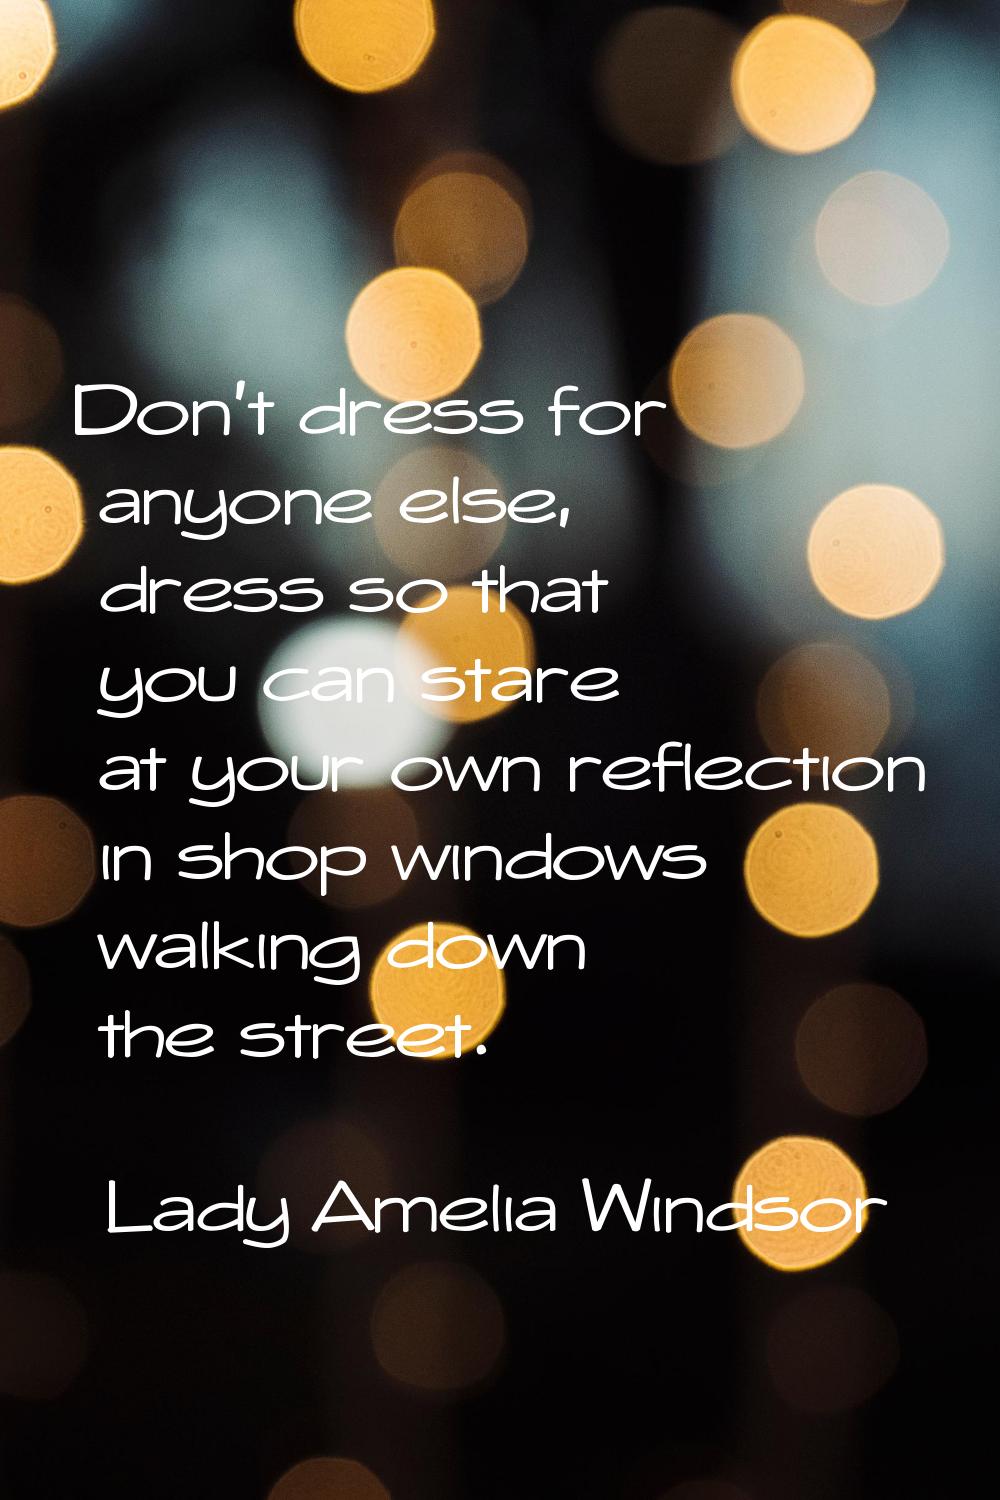 Don't dress for anyone else, dress so that you can stare at your own reflection in shop windows wal